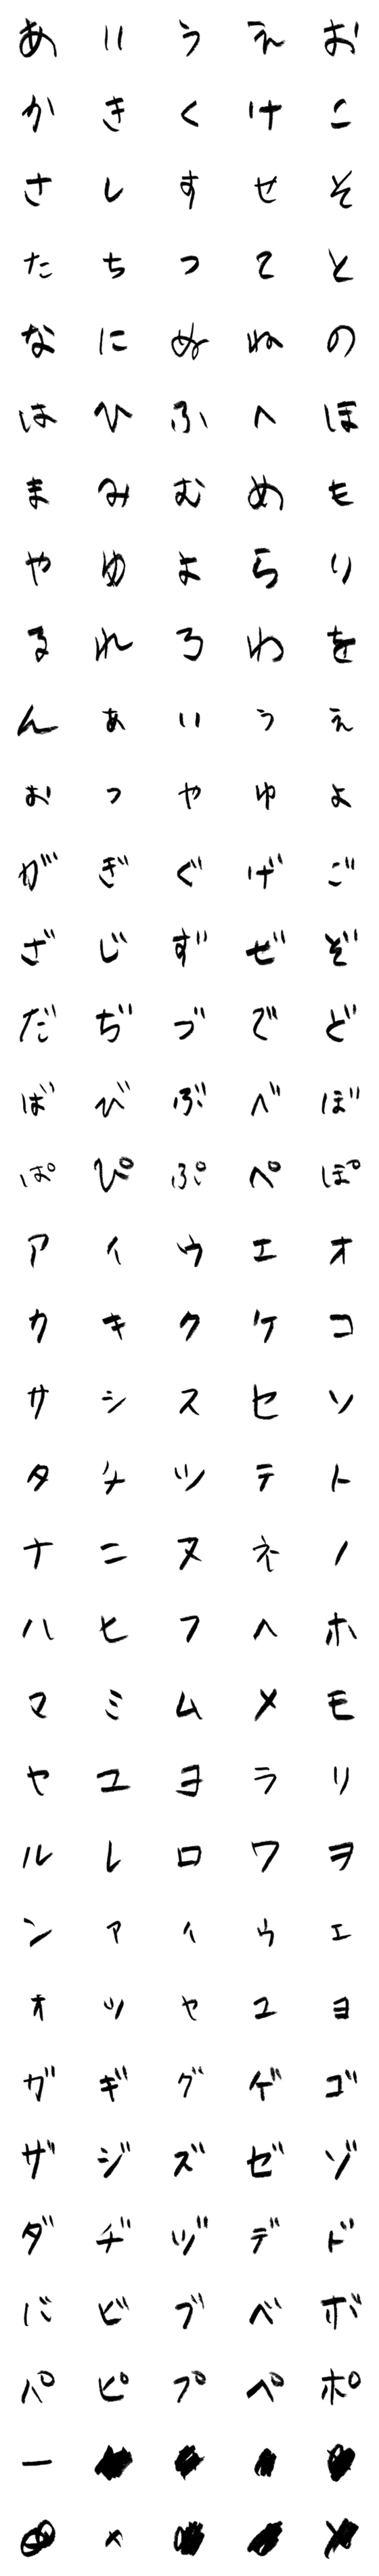 [LINE絵文字]消しゴムがない！の画像一覧